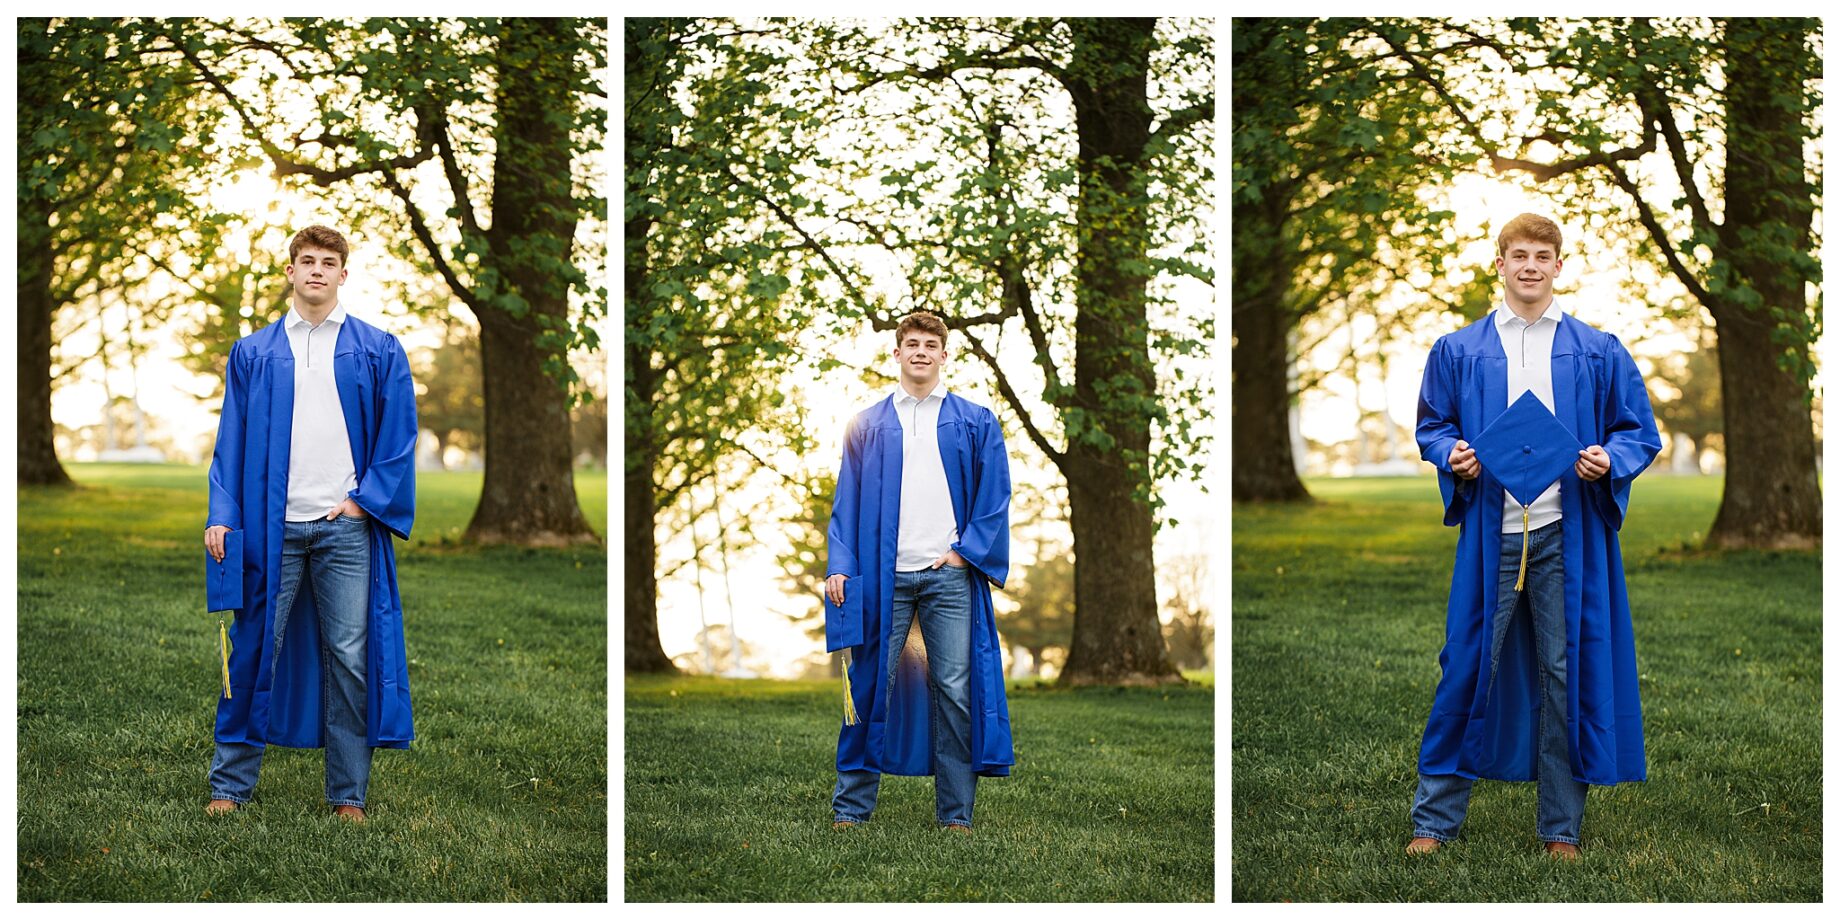 perryville missouri senior high school photographer, cape girardeau senior high school photographer, farmington missouri senior high school photographer, boy, blue gown, st Vincent DePaul, sunset, sun through trees, arms crossed, cap and gown